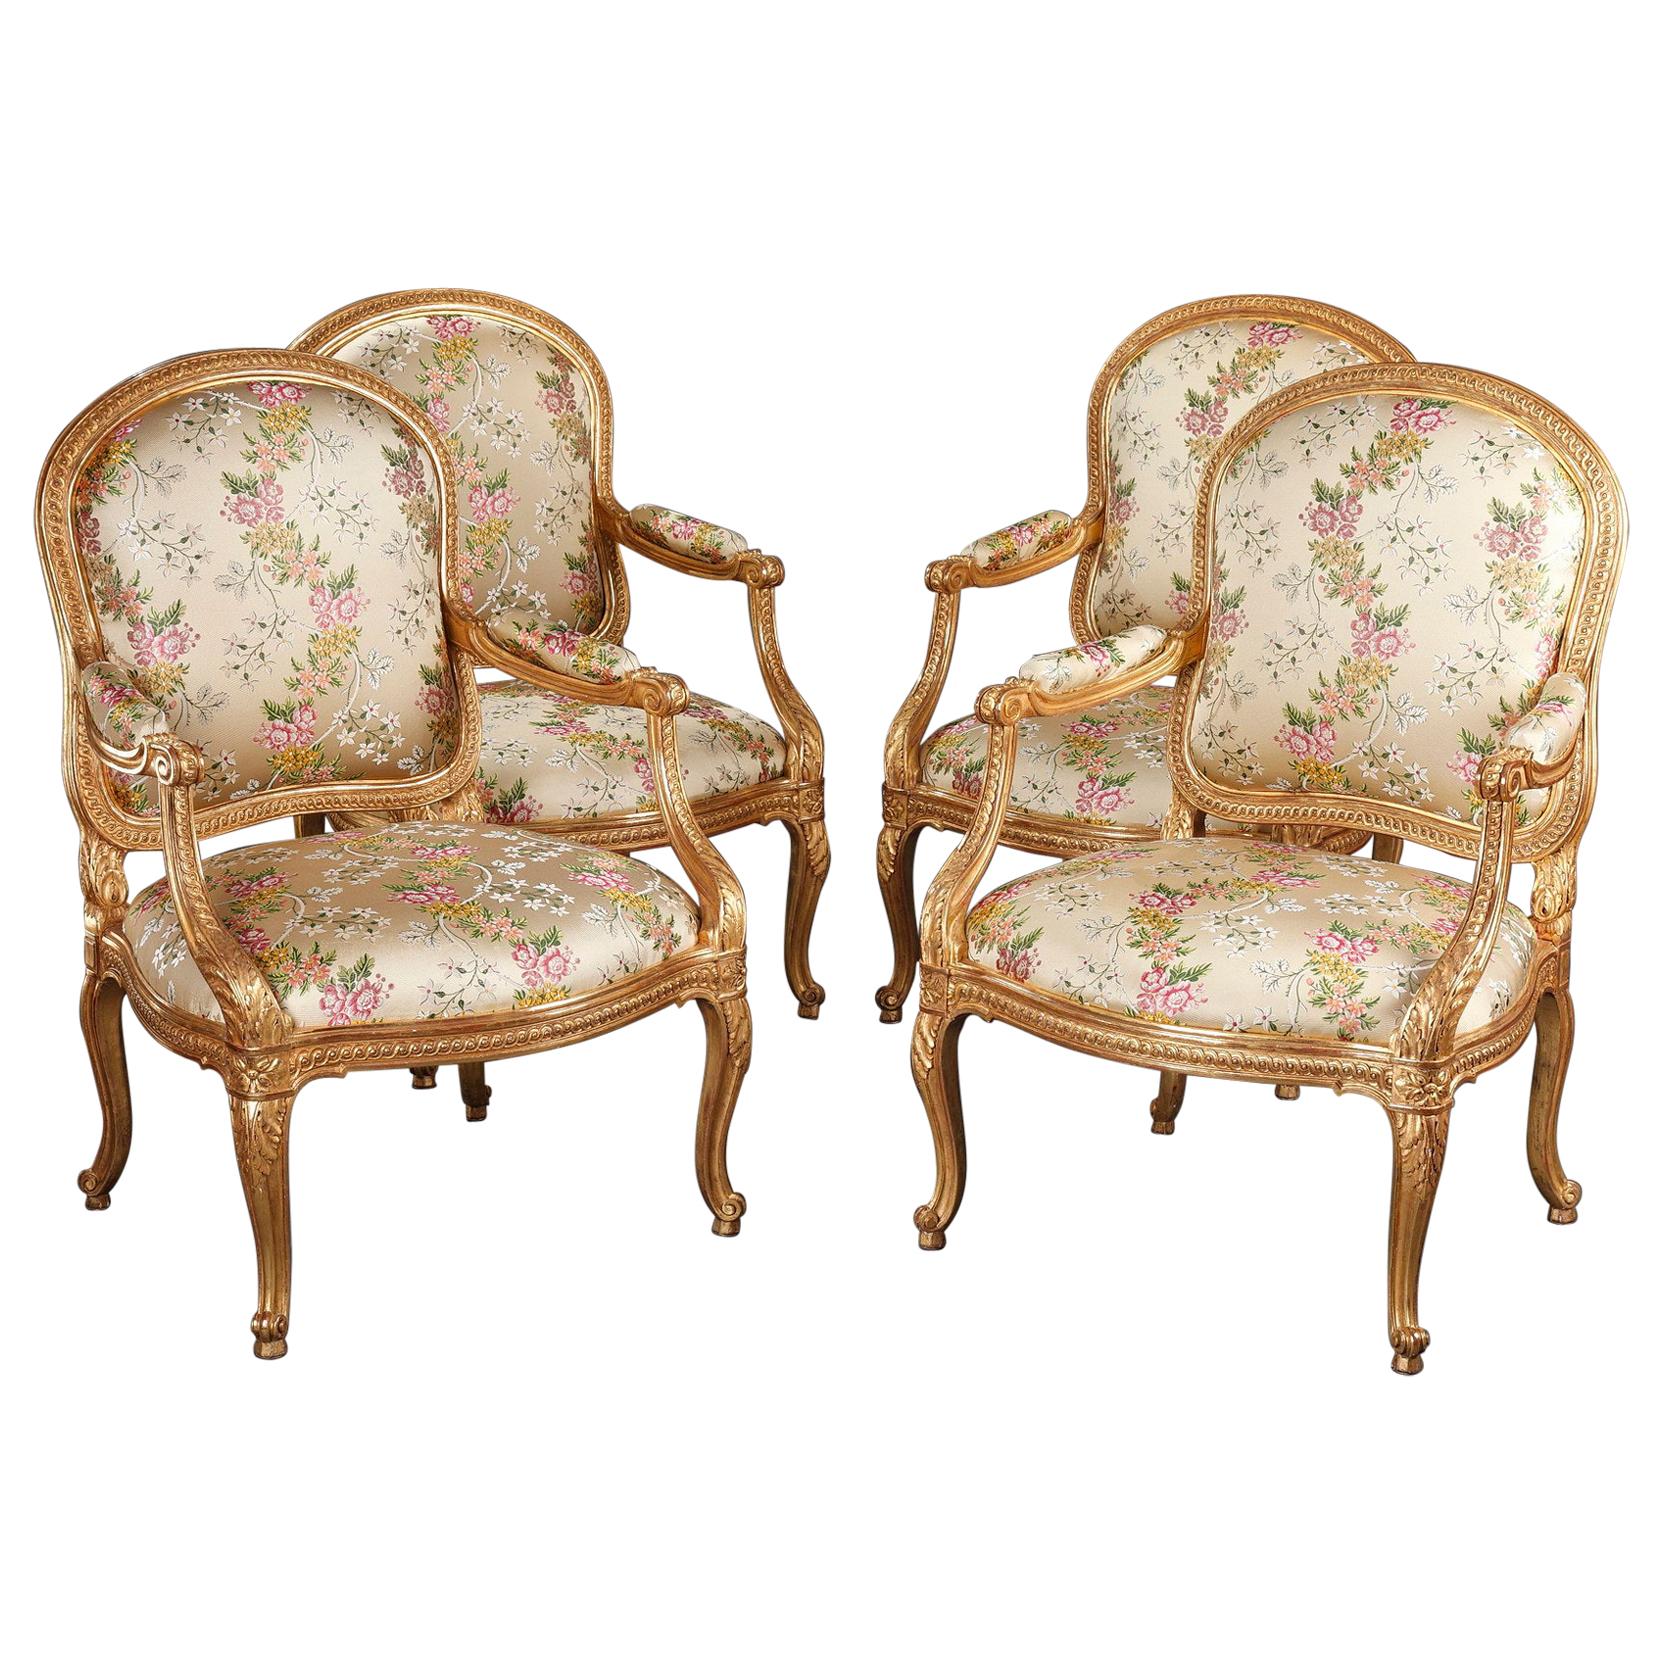 Beautiful Set of Four Transition Style Armchairs "A Chassis", France, Circa 1880